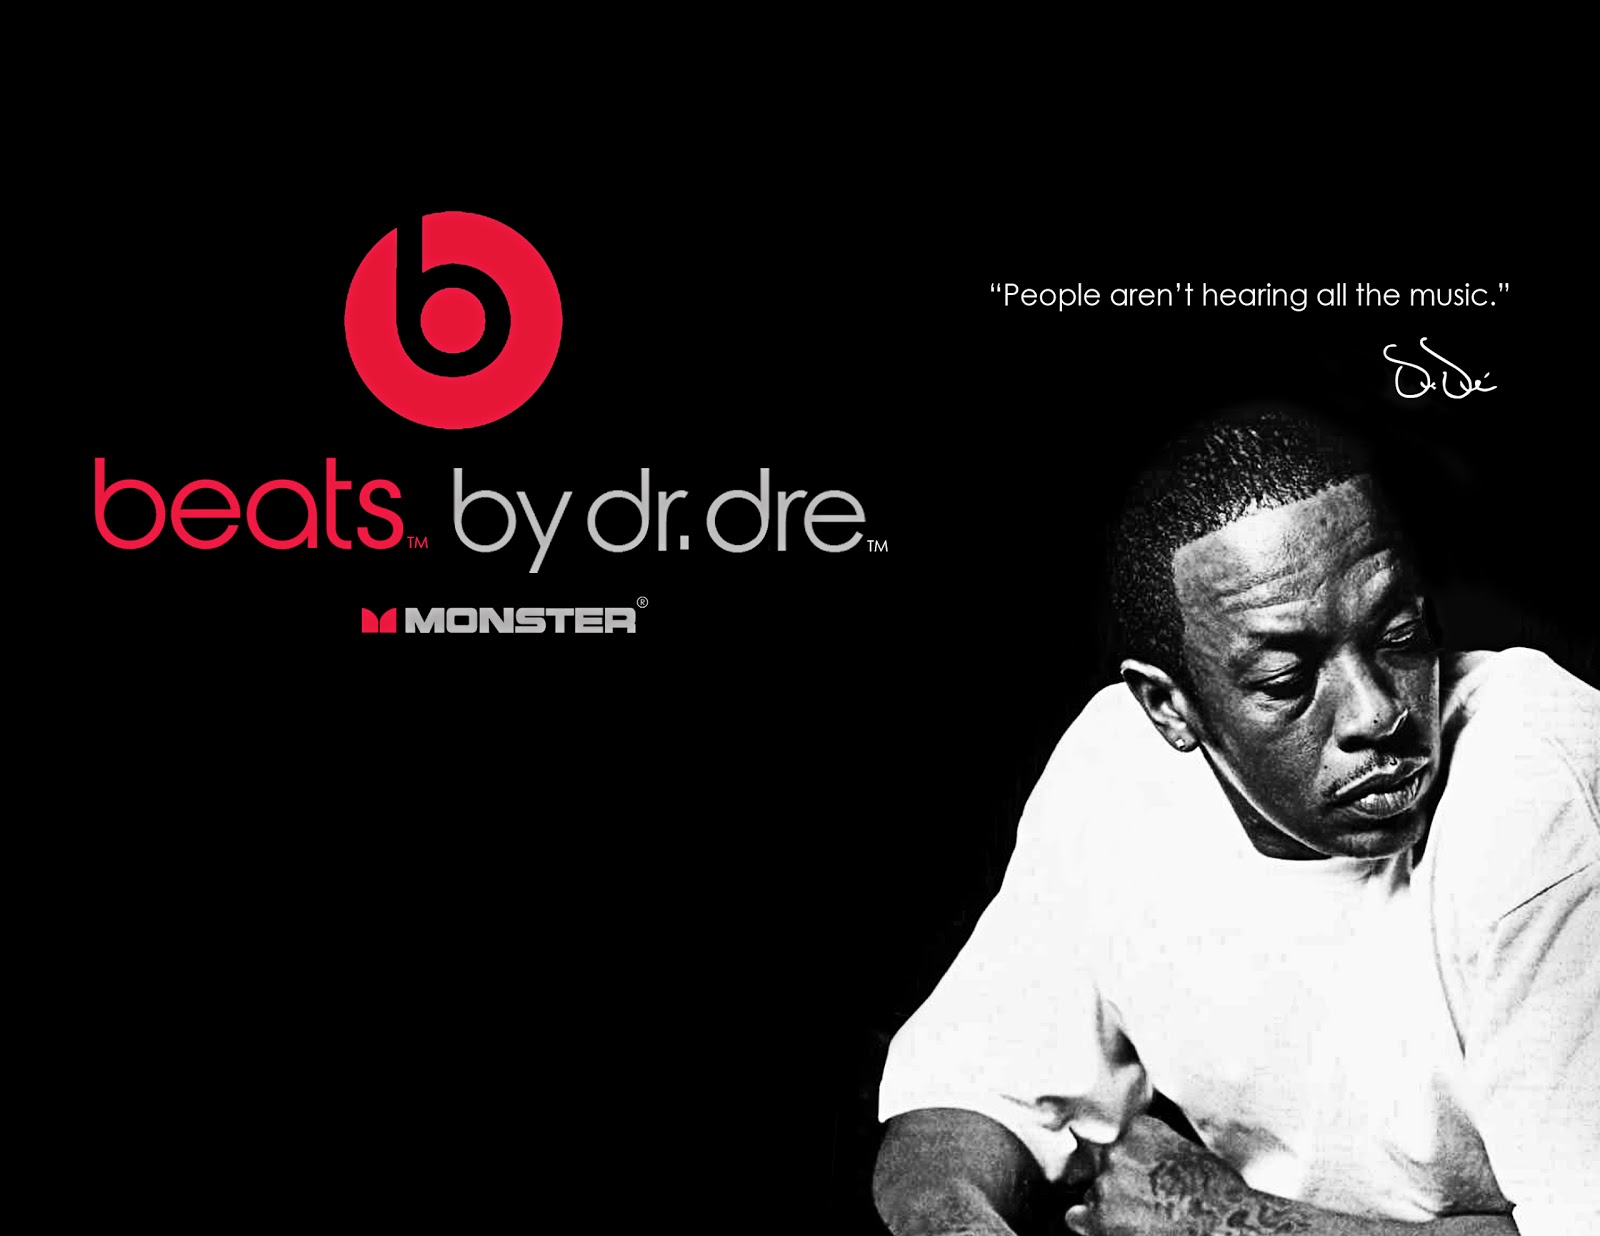 beats by dr dre logo photo ohmigee beats by